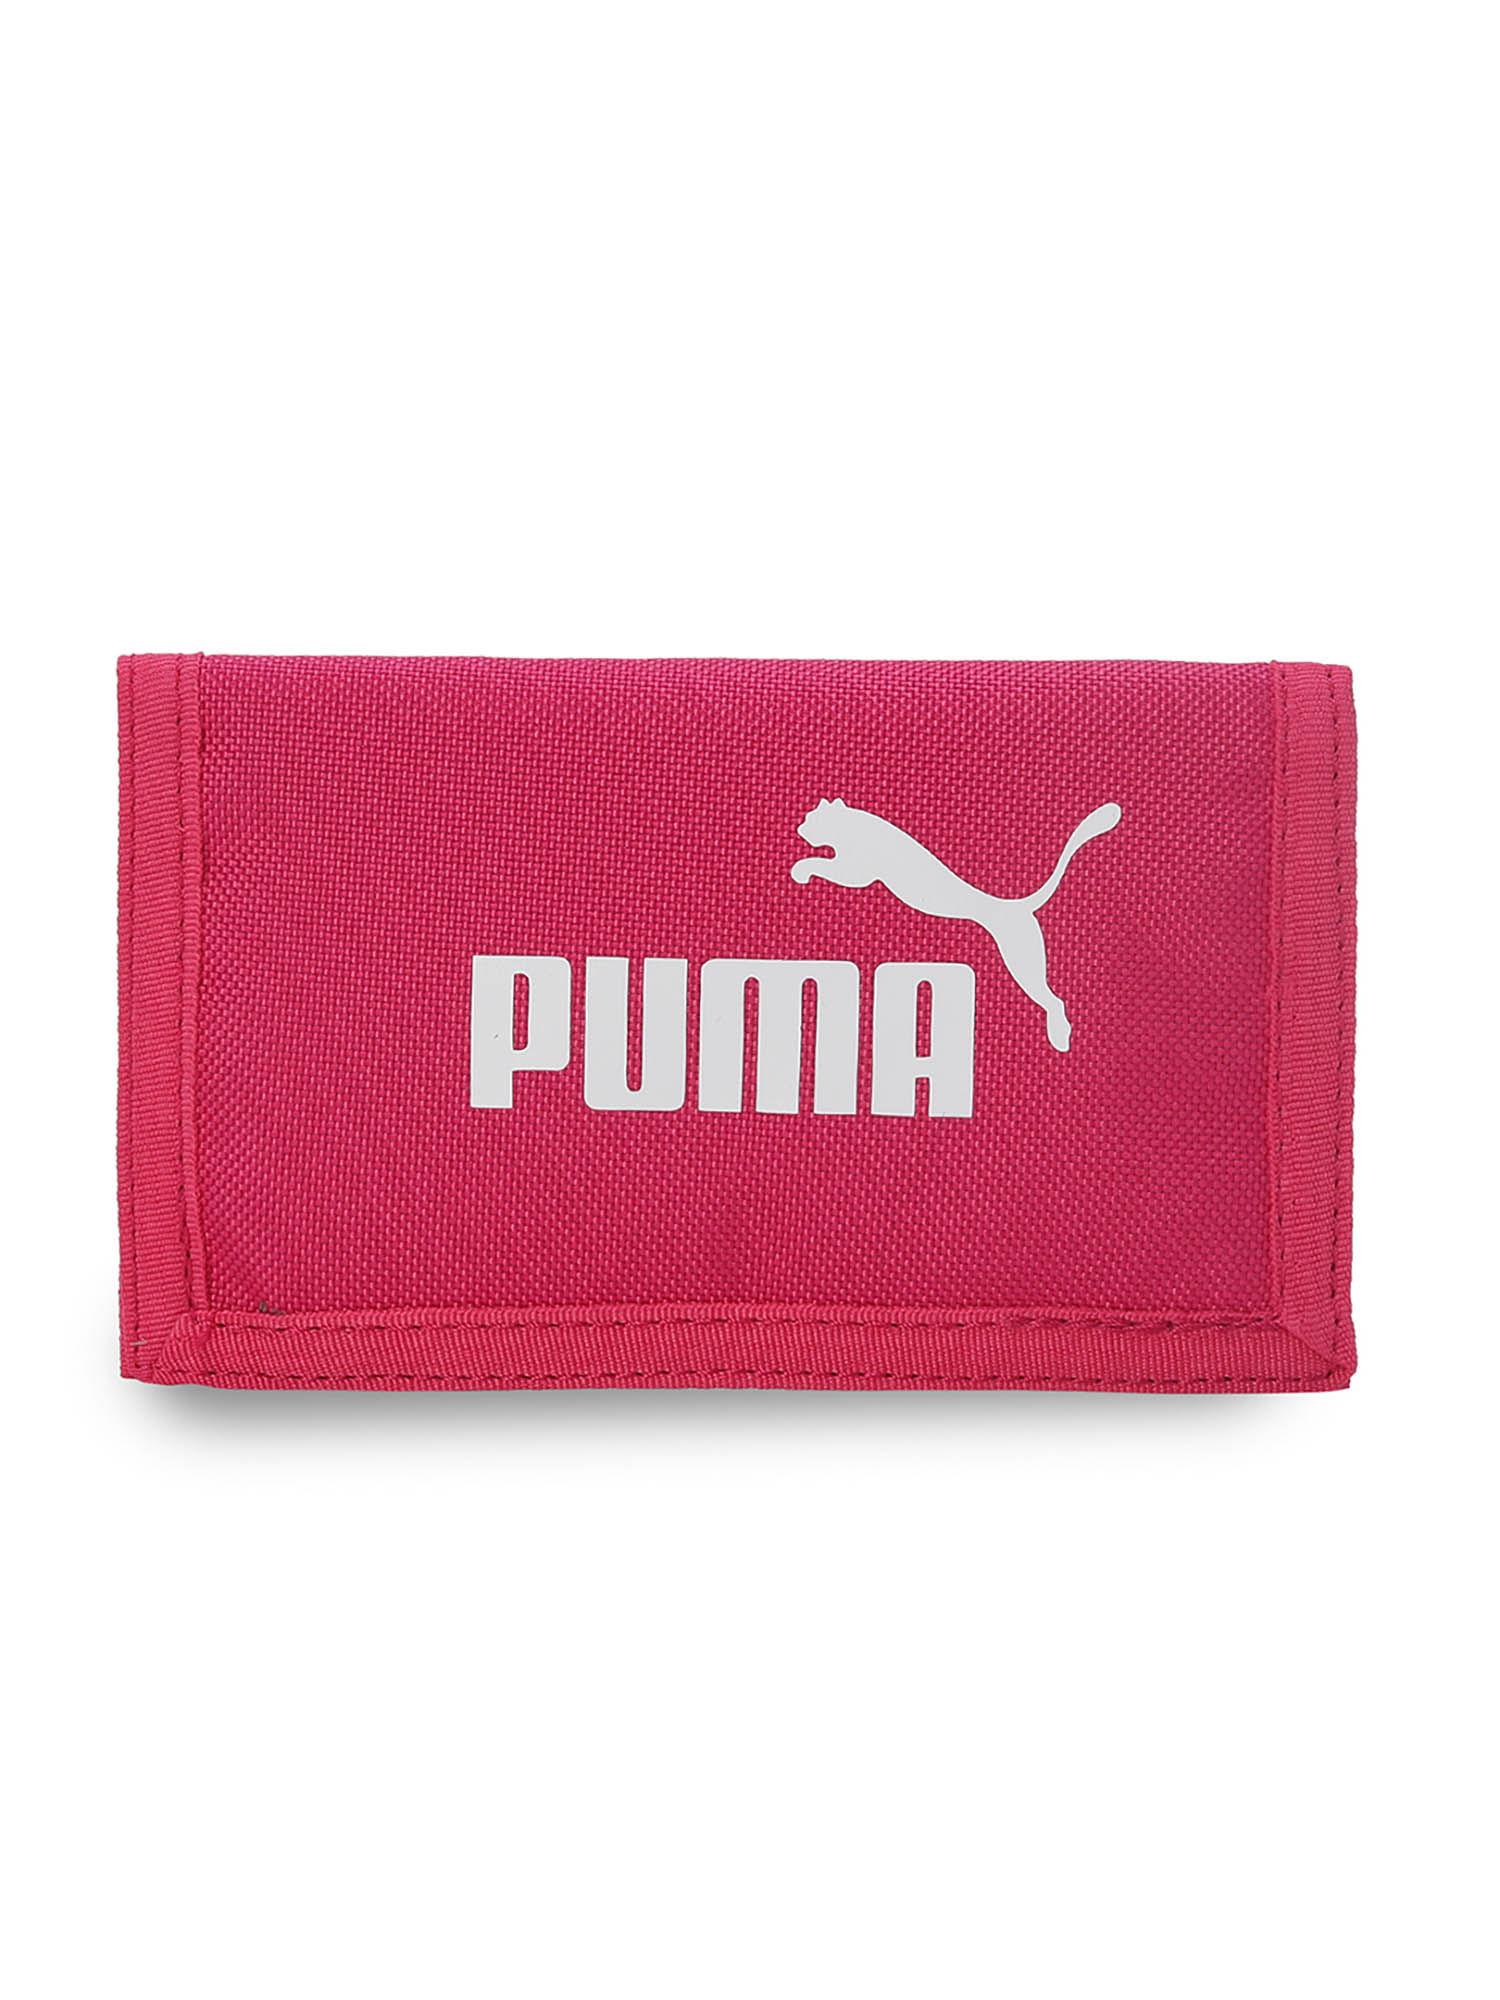 phase unisex pink wallets